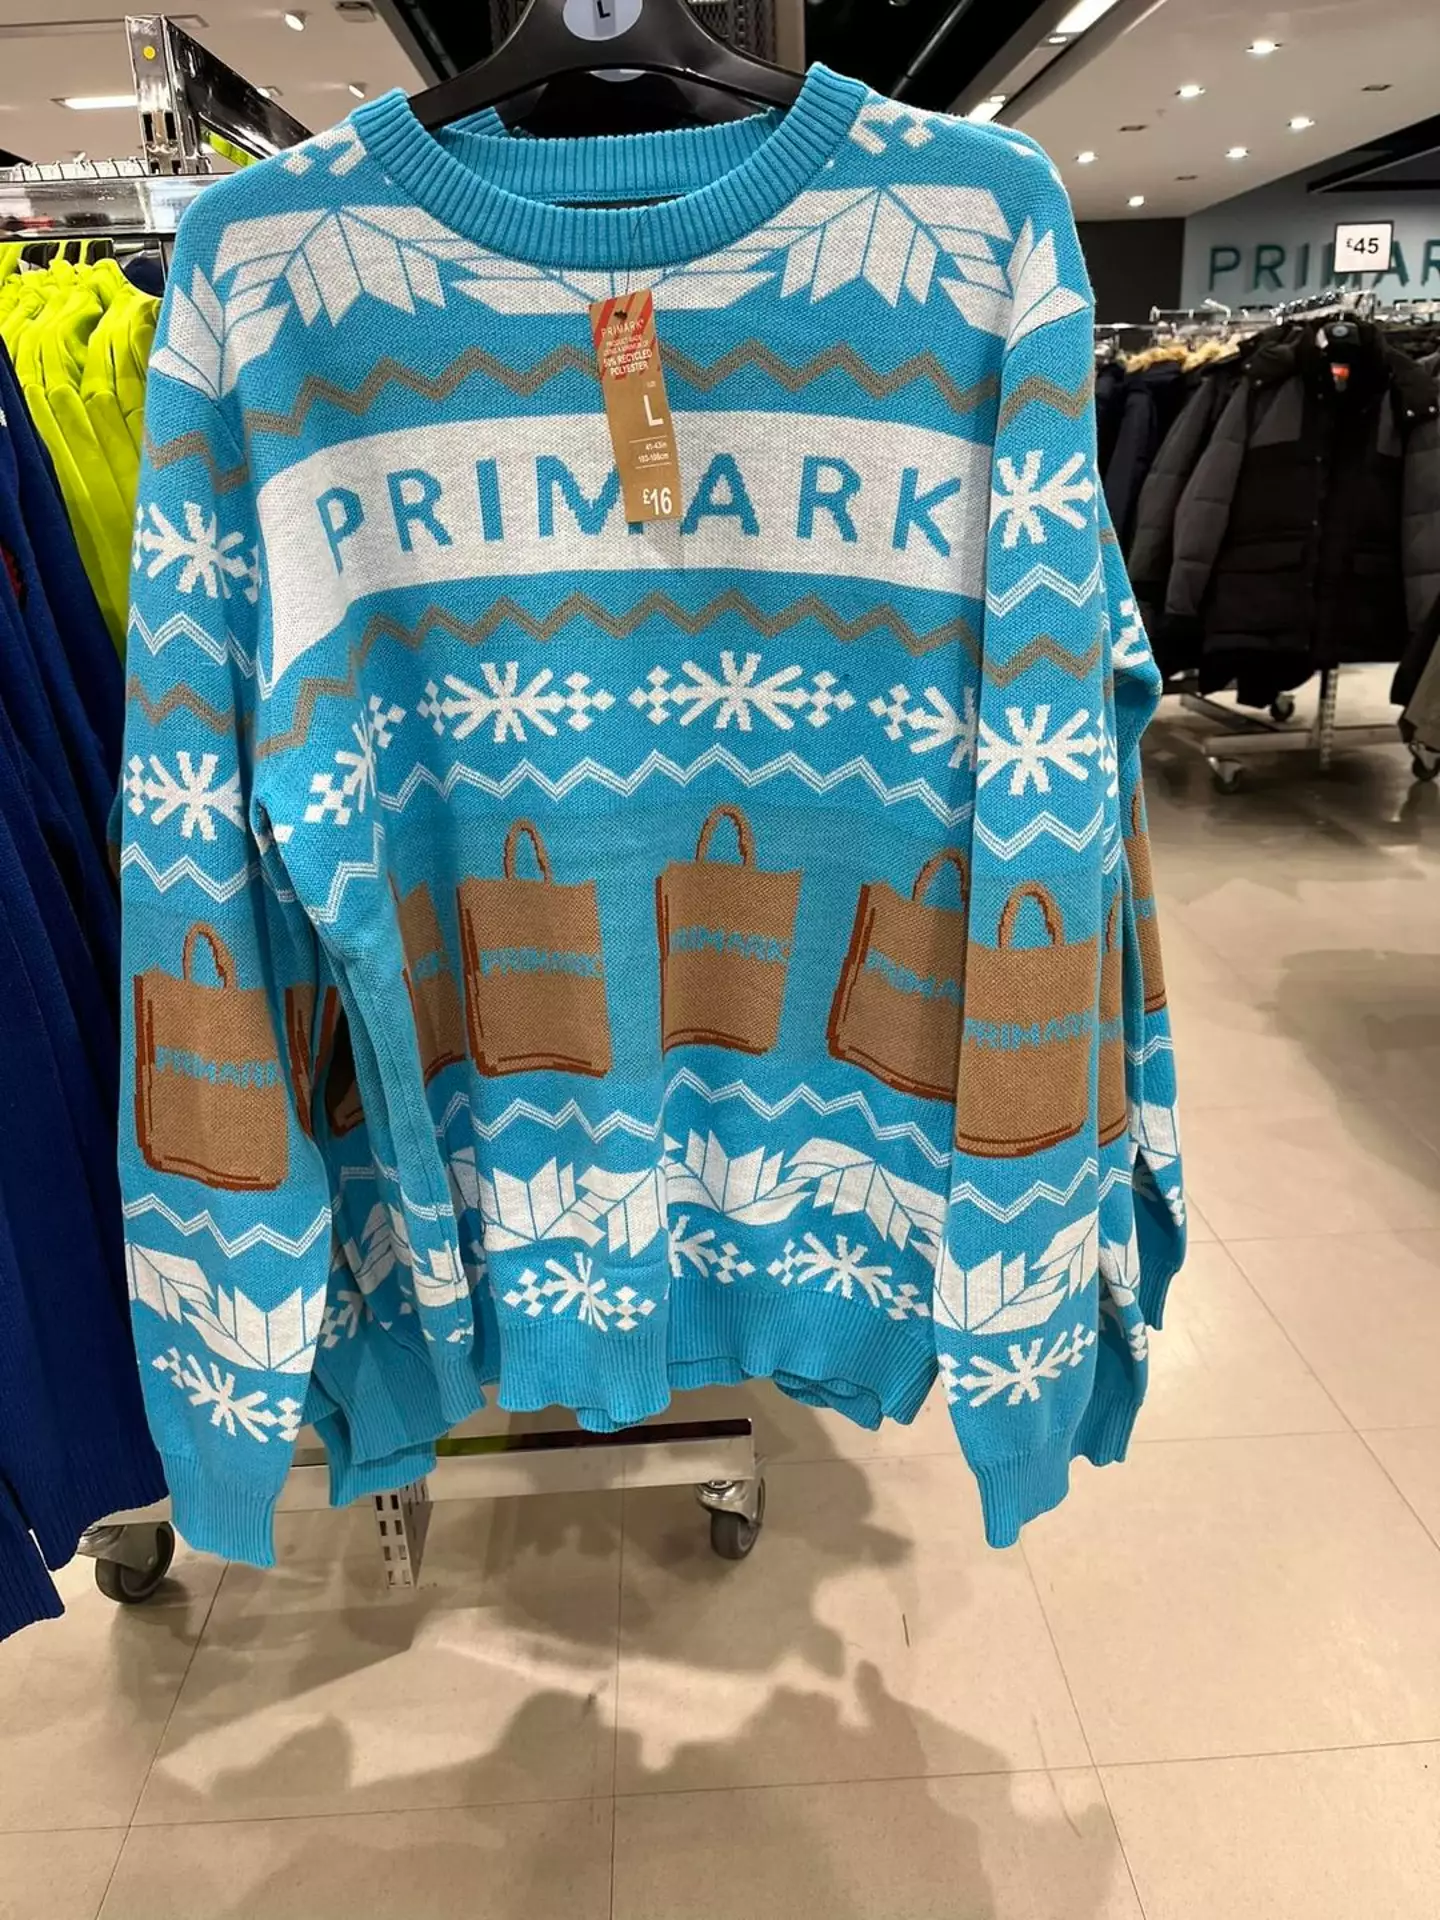 The Primark Christmas jumper brought about some very divided opinions.